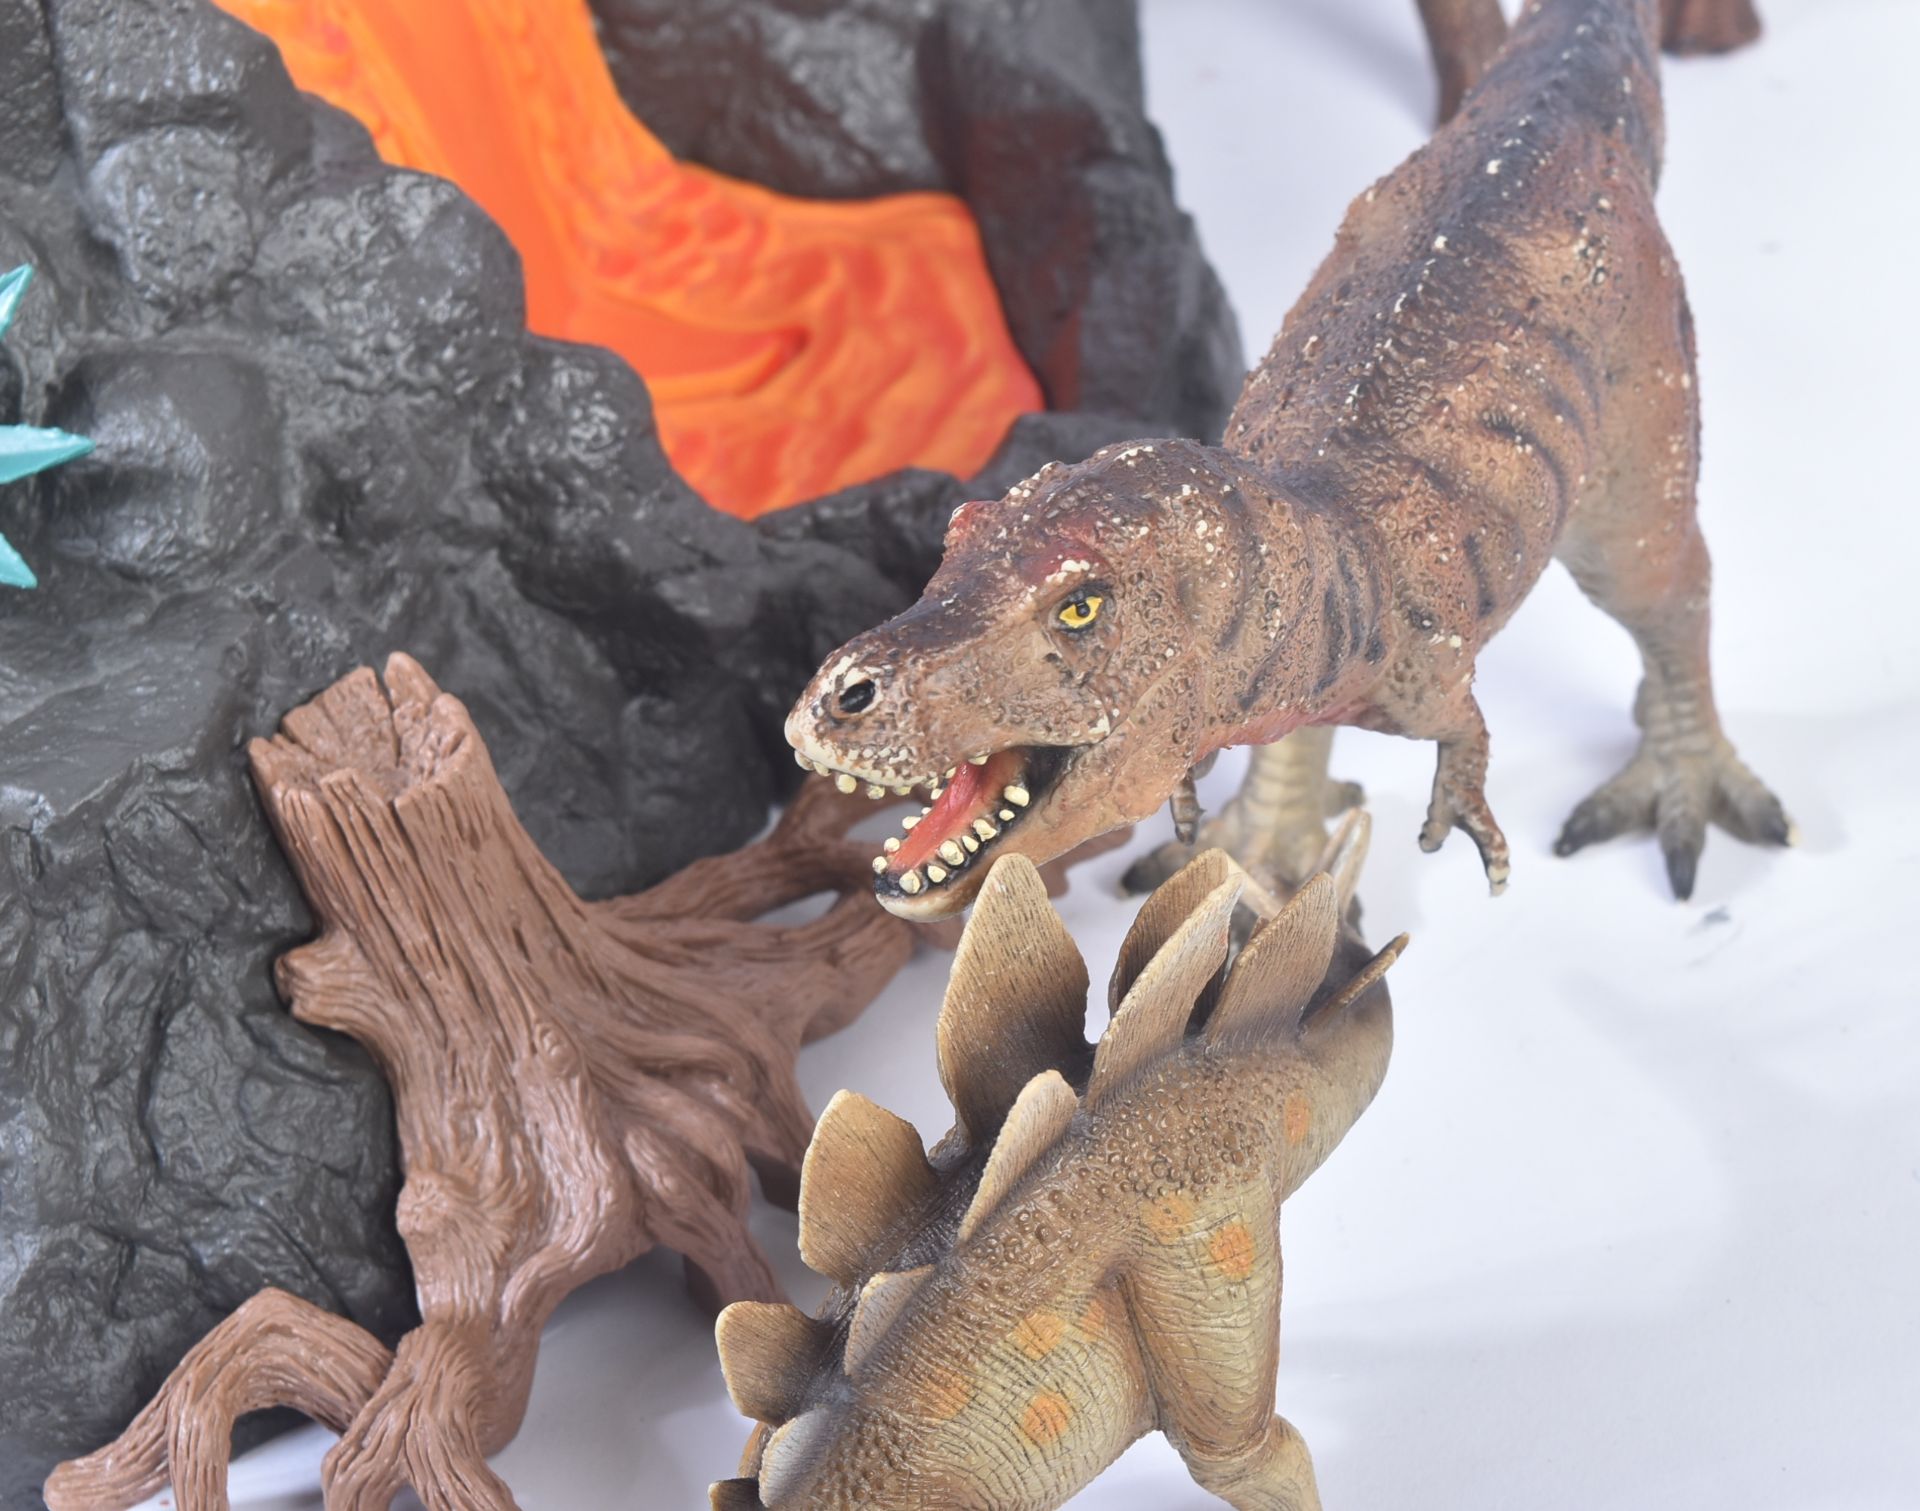 SCHLEICH VOLCANO PLAYSET WITH DINOSAURS - Image 4 of 10